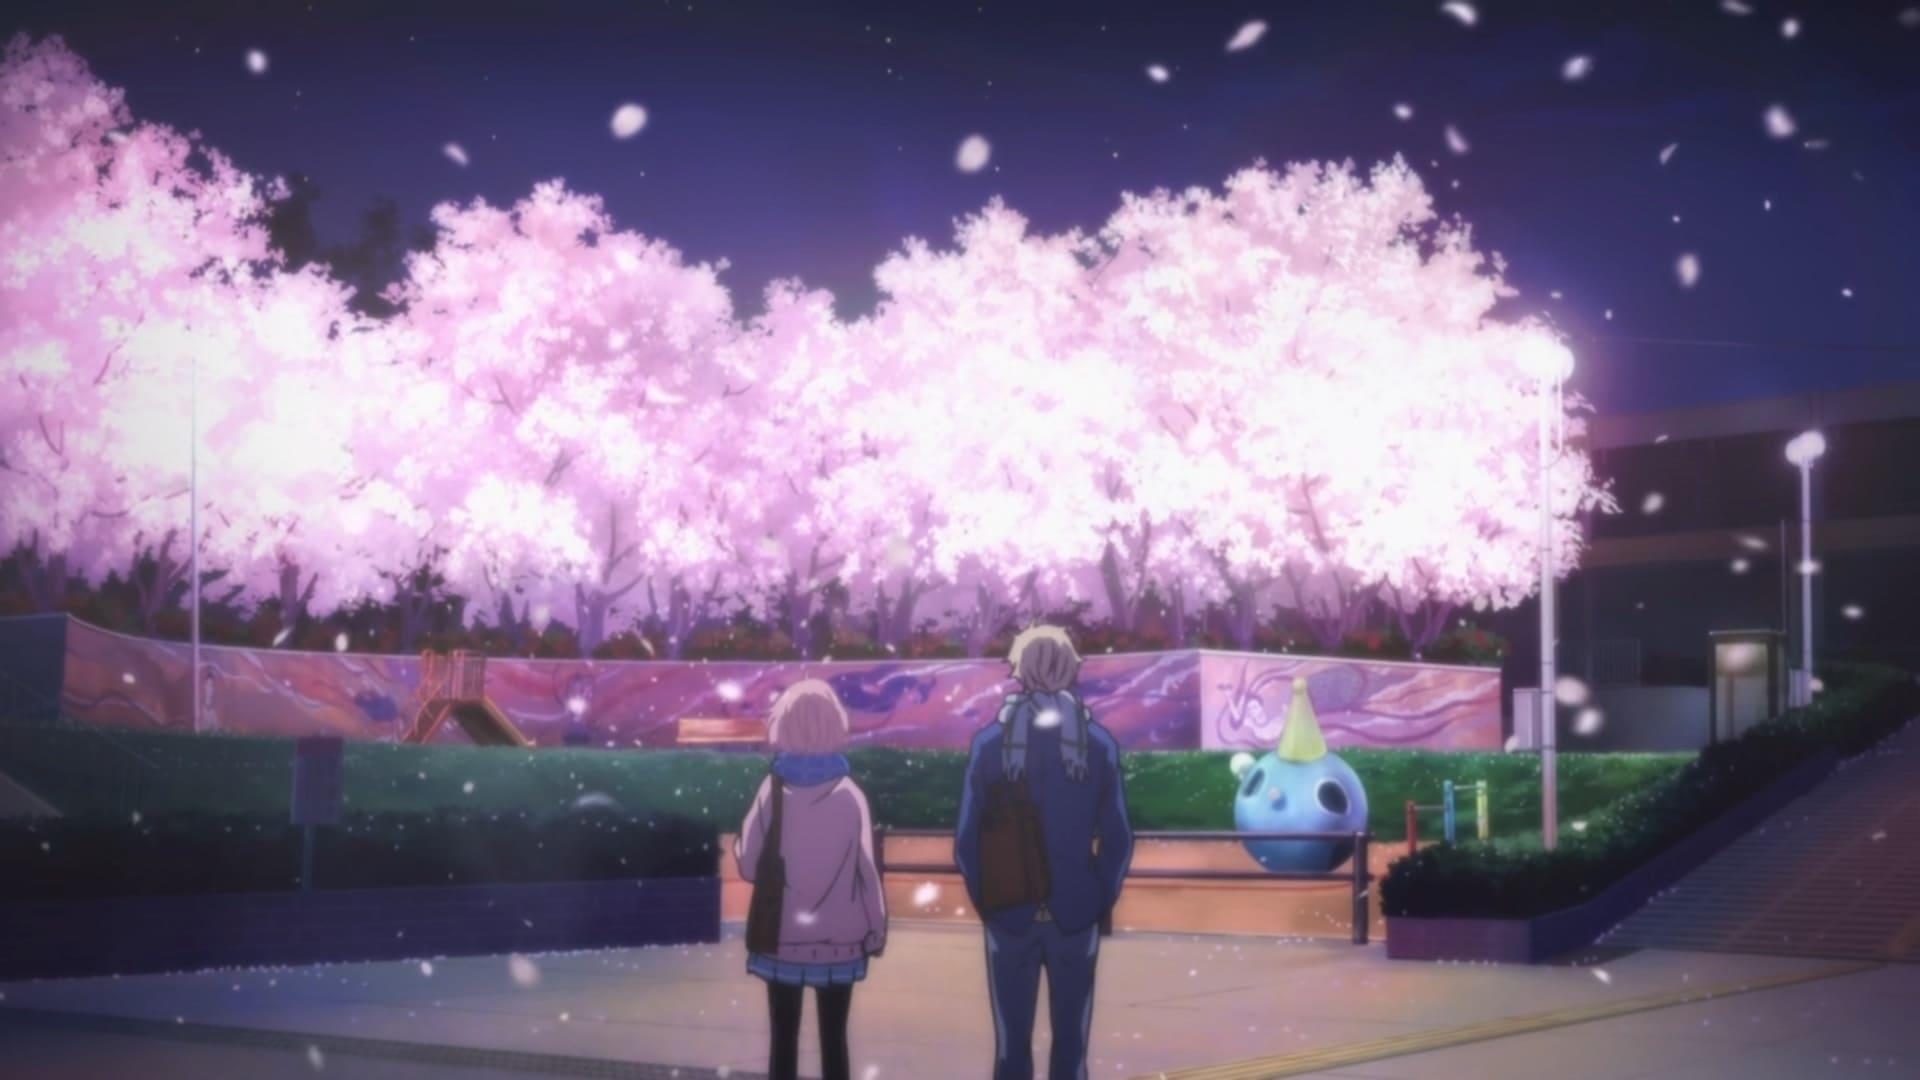 Beyond the Boundary: I'll Be Here – Future backdrop